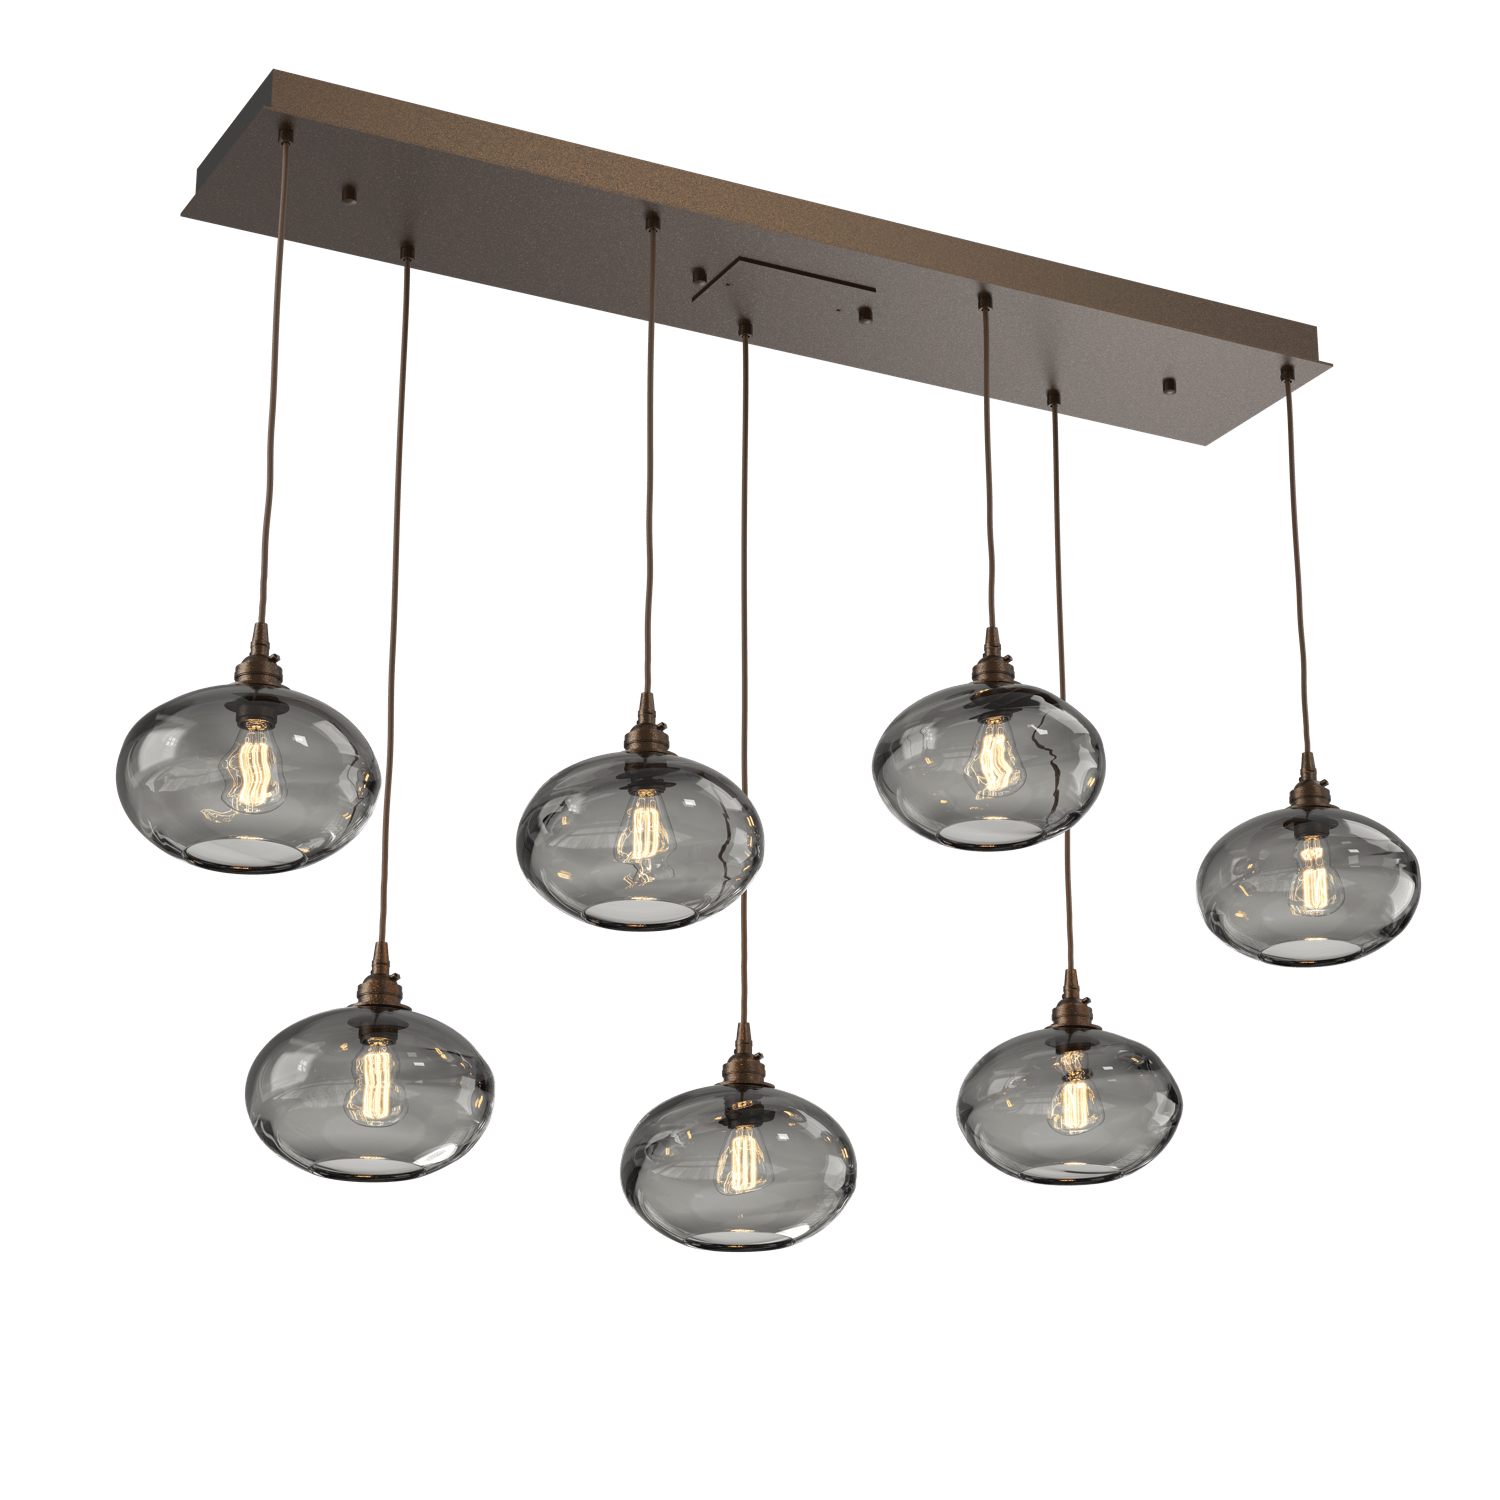 PLB0036-07-FB-OS-Hammerton-Studio-Optic-Blown-Glass-Coppa-7-light-linear-pendant-chandelier-with-flat-bronze-finish-and-optic-smoke-blown-glass-shades-and-incandescent-lamping